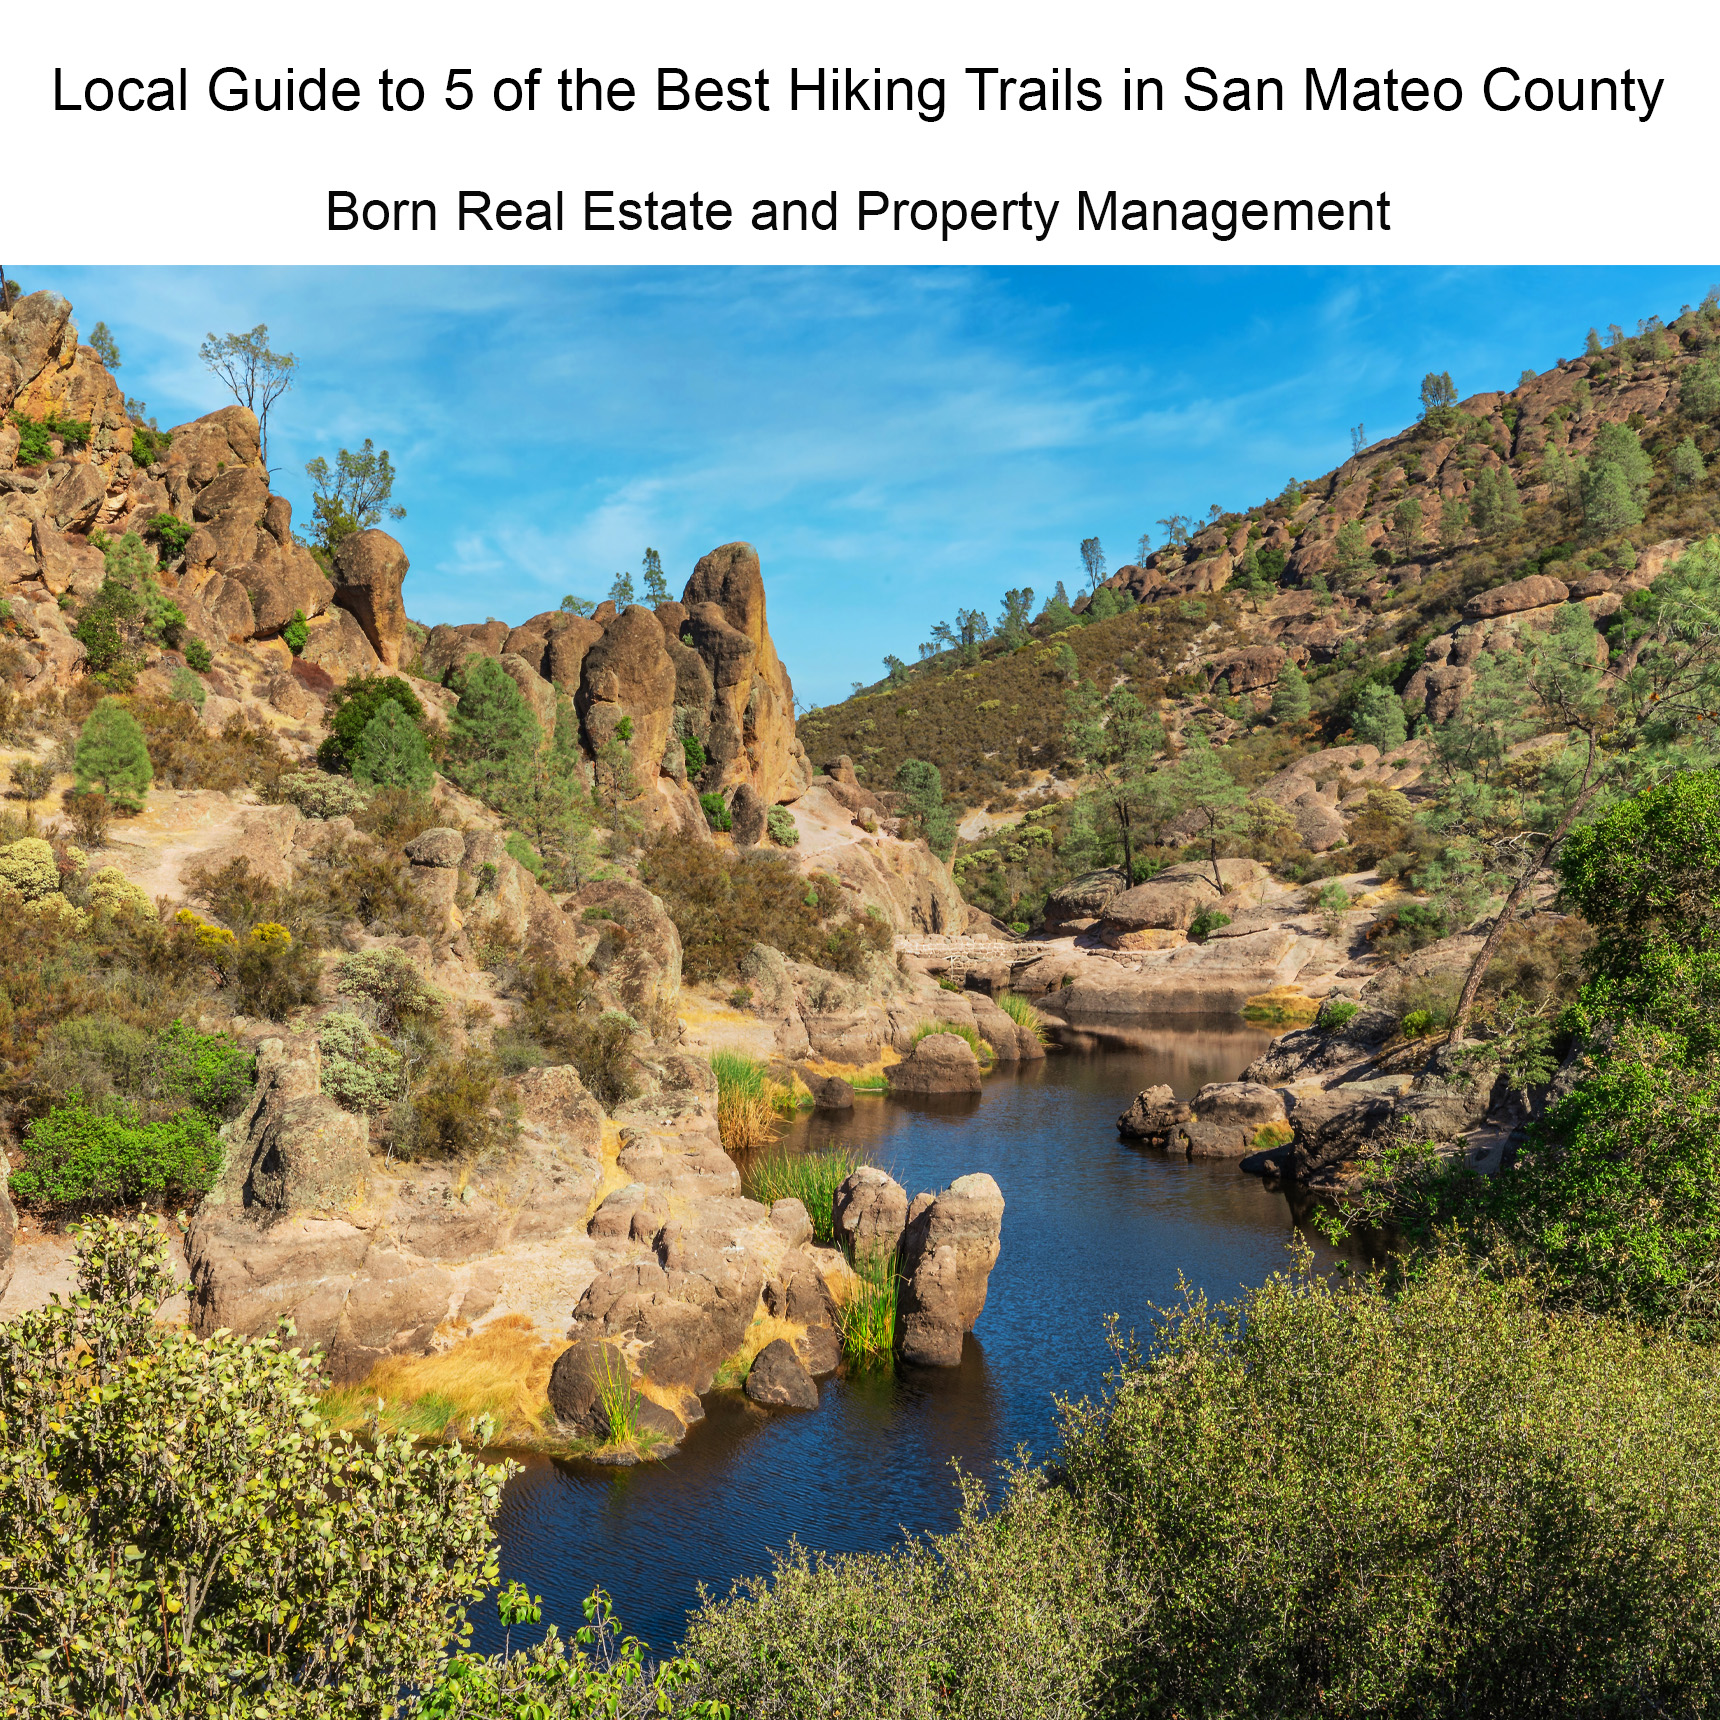 Local Guide to 6 of the Best Hiking Trails in San Mateo County and the San Francisco Peninsula